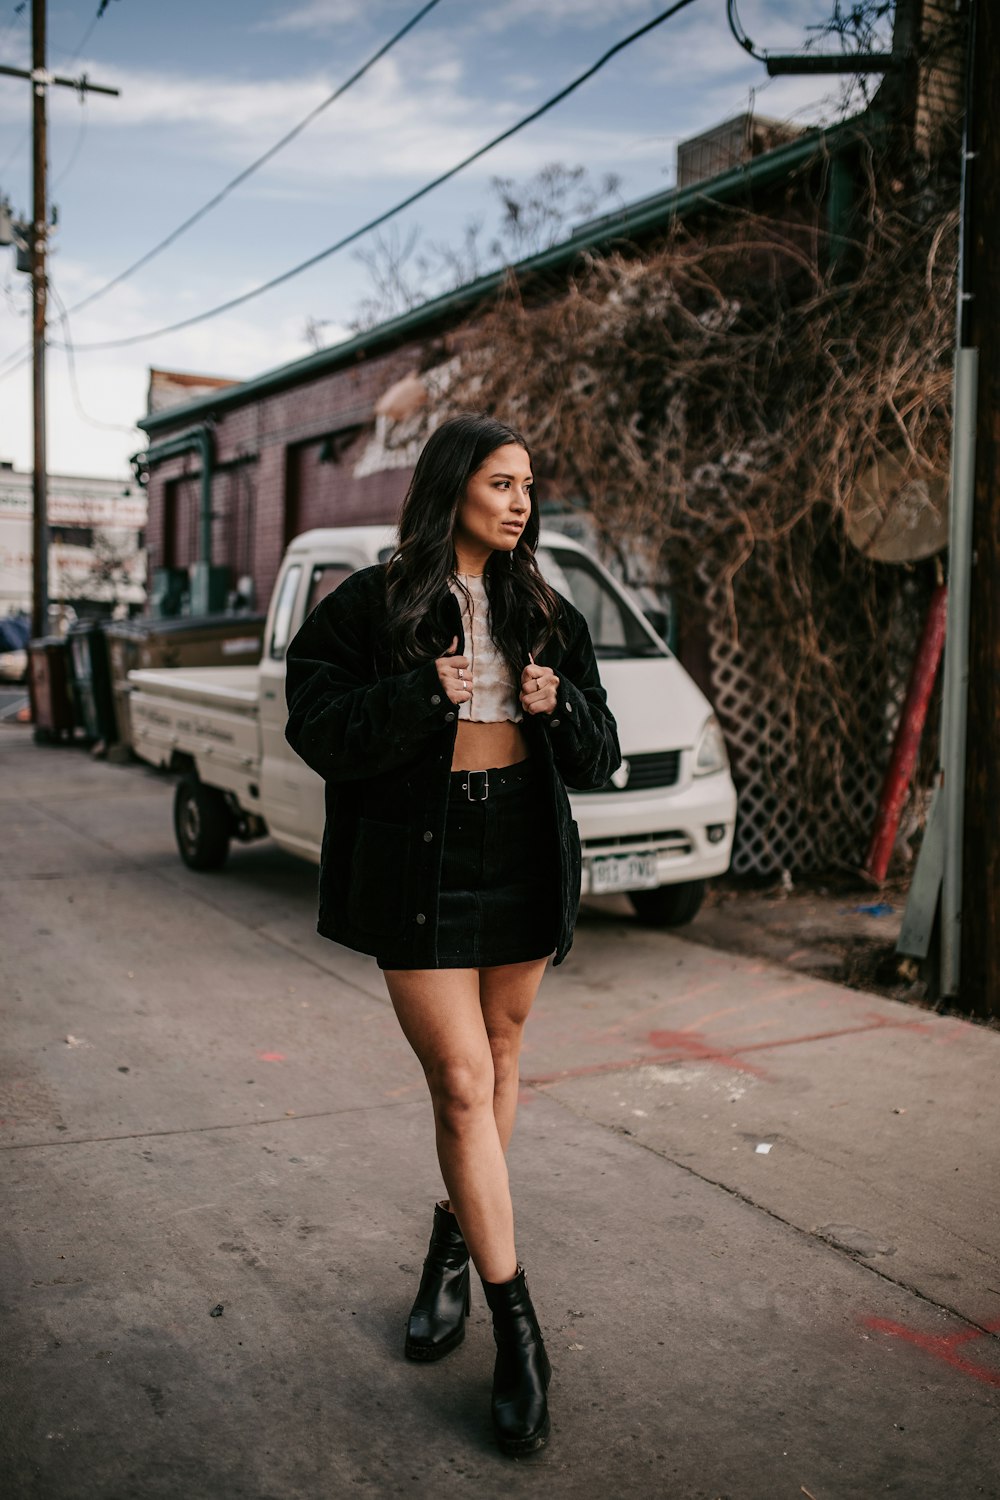 A woman walking down the street in a short skirt photo – Free Co Image on  Unsplash